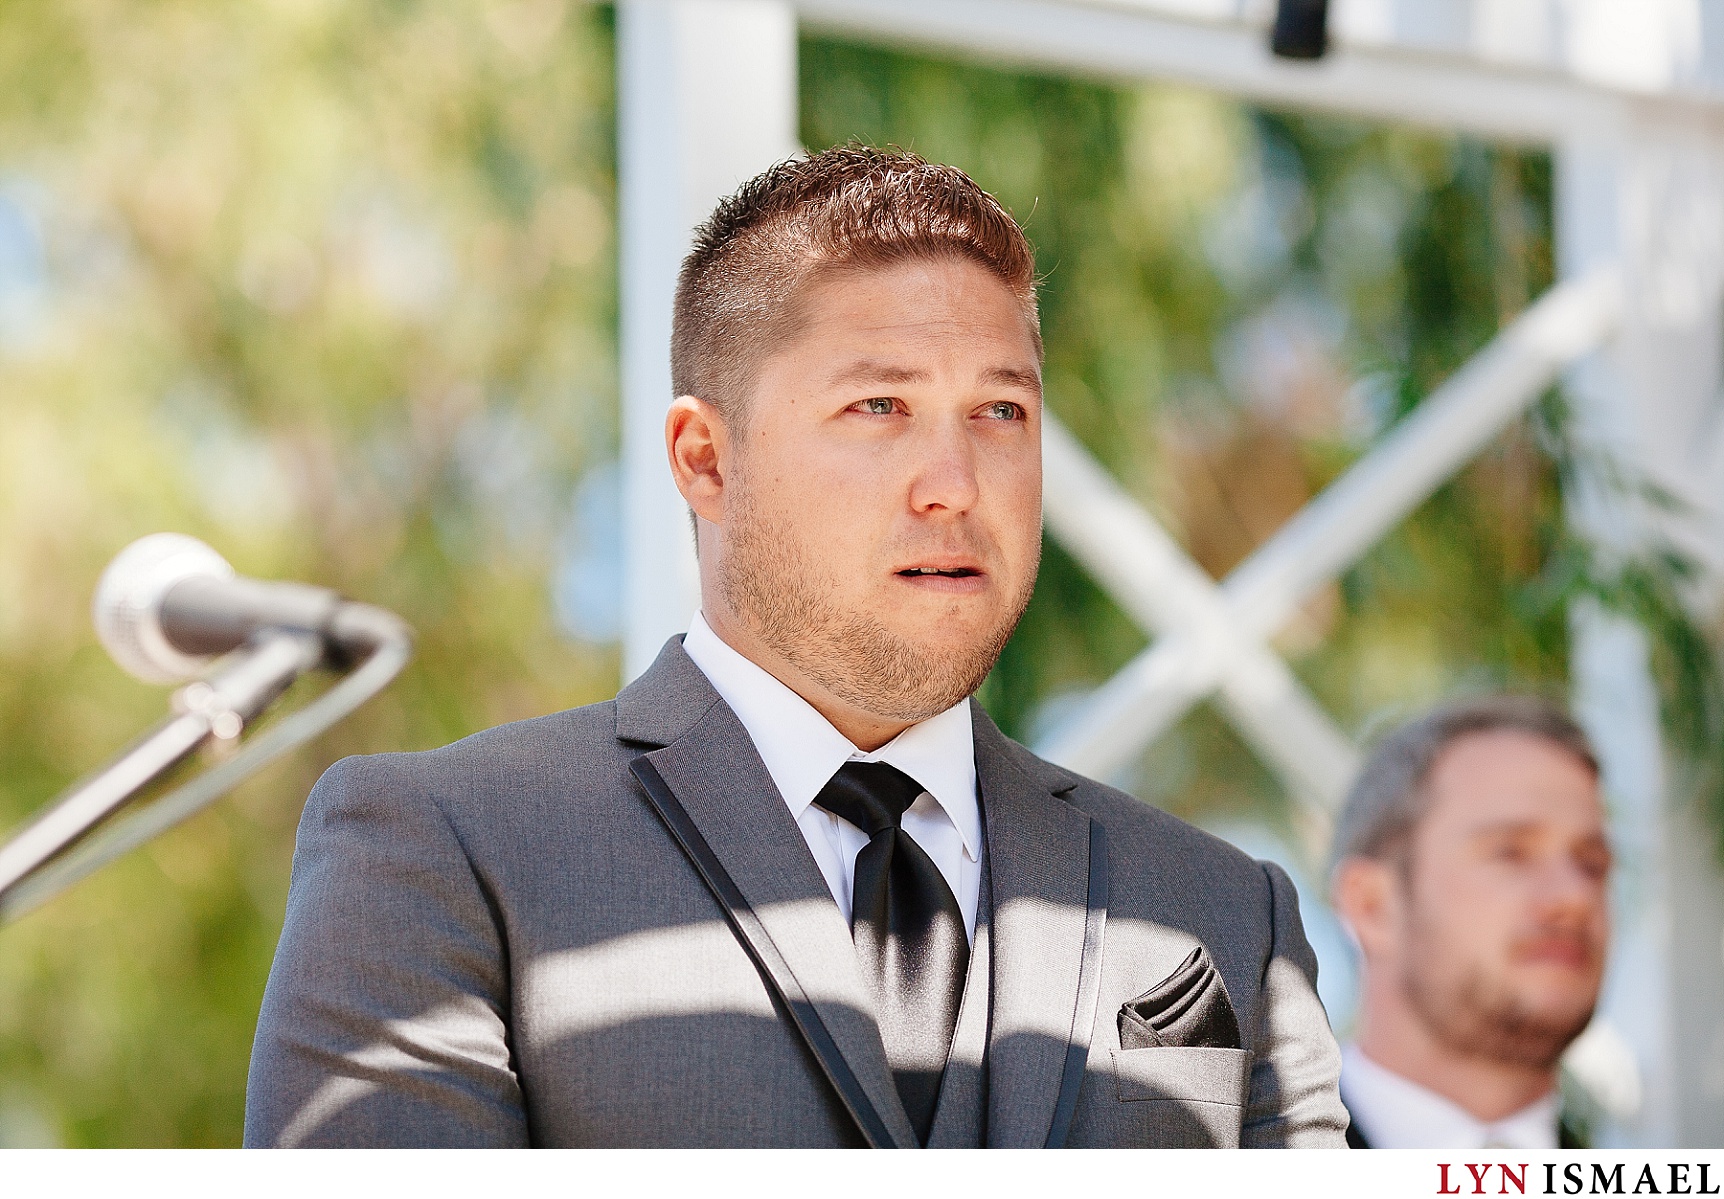 Groom gets emotional as he watched his bride walk down the aisle.